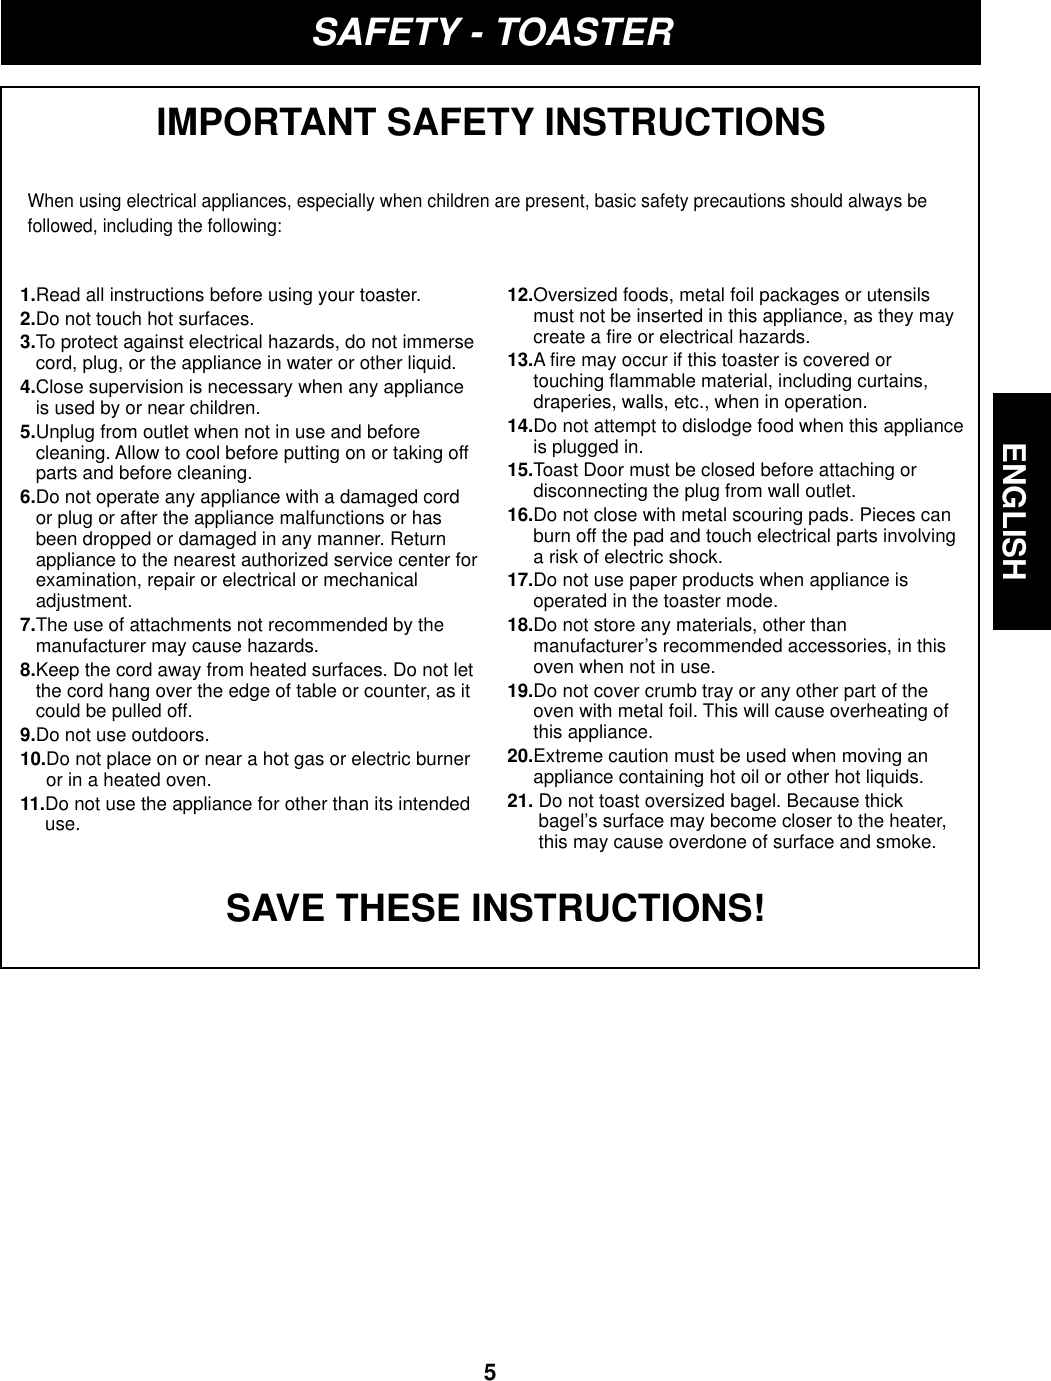 ENGLISH5ENGLISHSAFETY - TOASTERIMPORTANT SAFETY INSTRUCTIONSWhen using electrical appliances, especially when children are present, basic safety precautions should always befollowed, including the following:SAVE THESE INSTRUCTIONS!1.Read all instructions before using your toaster.2.Do not touch hot surfaces.3.To protect against electrical hazards, do not immersecord, plug, or the appliance in water or other liquid.4.Close supervision is necessary when any applianceis used by or near children.5.Unplug from outlet when not in use and beforecleaning. Allow to cool before putting on or taking offparts and before cleaning.6.Do not operate any appliance with a damaged cordor plug or after the appliance malfunctions or hasbeen dropped or damaged in any manner. Returnappliance to the nearest authorized service center forexamination, repair or electrical or mechanicaladjustment.7.The use of attachments not recommended by themanufacturer may cause hazards.8.Keep the cord away from heated surfaces. Do not letthe cord hang over the edge of table or counter, as itcould be pulled off.9.Do not use outdoors.10.Do not place on or near a hot gas or electric burneror in a heated oven. 11.Do not use the appliance for other than its intendeduse.12.Oversized foods, metal foil packages or utensilsmust not be inserted in this appliance, as they maycreate a fire or electrical hazards.13.A fire may occur if this toaster is covered ortouching flammable material, including curtains,draperies, walls, etc., when in operation.14.Do not attempt to dislodge food when this applianceis plugged in.15.Toast Door must be closed before attaching ordisconnecting the plug from wall outlet.16.Do not close with metal scouring pads. Pieces canburn off the pad and touch electrical parts involvinga risk of electric shock.17.Do not use paper products when appliance isoperated in the toaster mode.18.Do not store any materials, other thanmanufacturer’s recommended accessories, in thisoven when not in use.19.Do not cover crumb tray or any other part of theoven with metal foil. This will cause overheating ofthis appliance.20.Extreme caution must be used when moving anappliance containing hot oil or other hot liquids.21. Do not toast oversized bagel. Because thickbagel’s surface may become closer to the heater,this may cause overdone of surface and smoke.